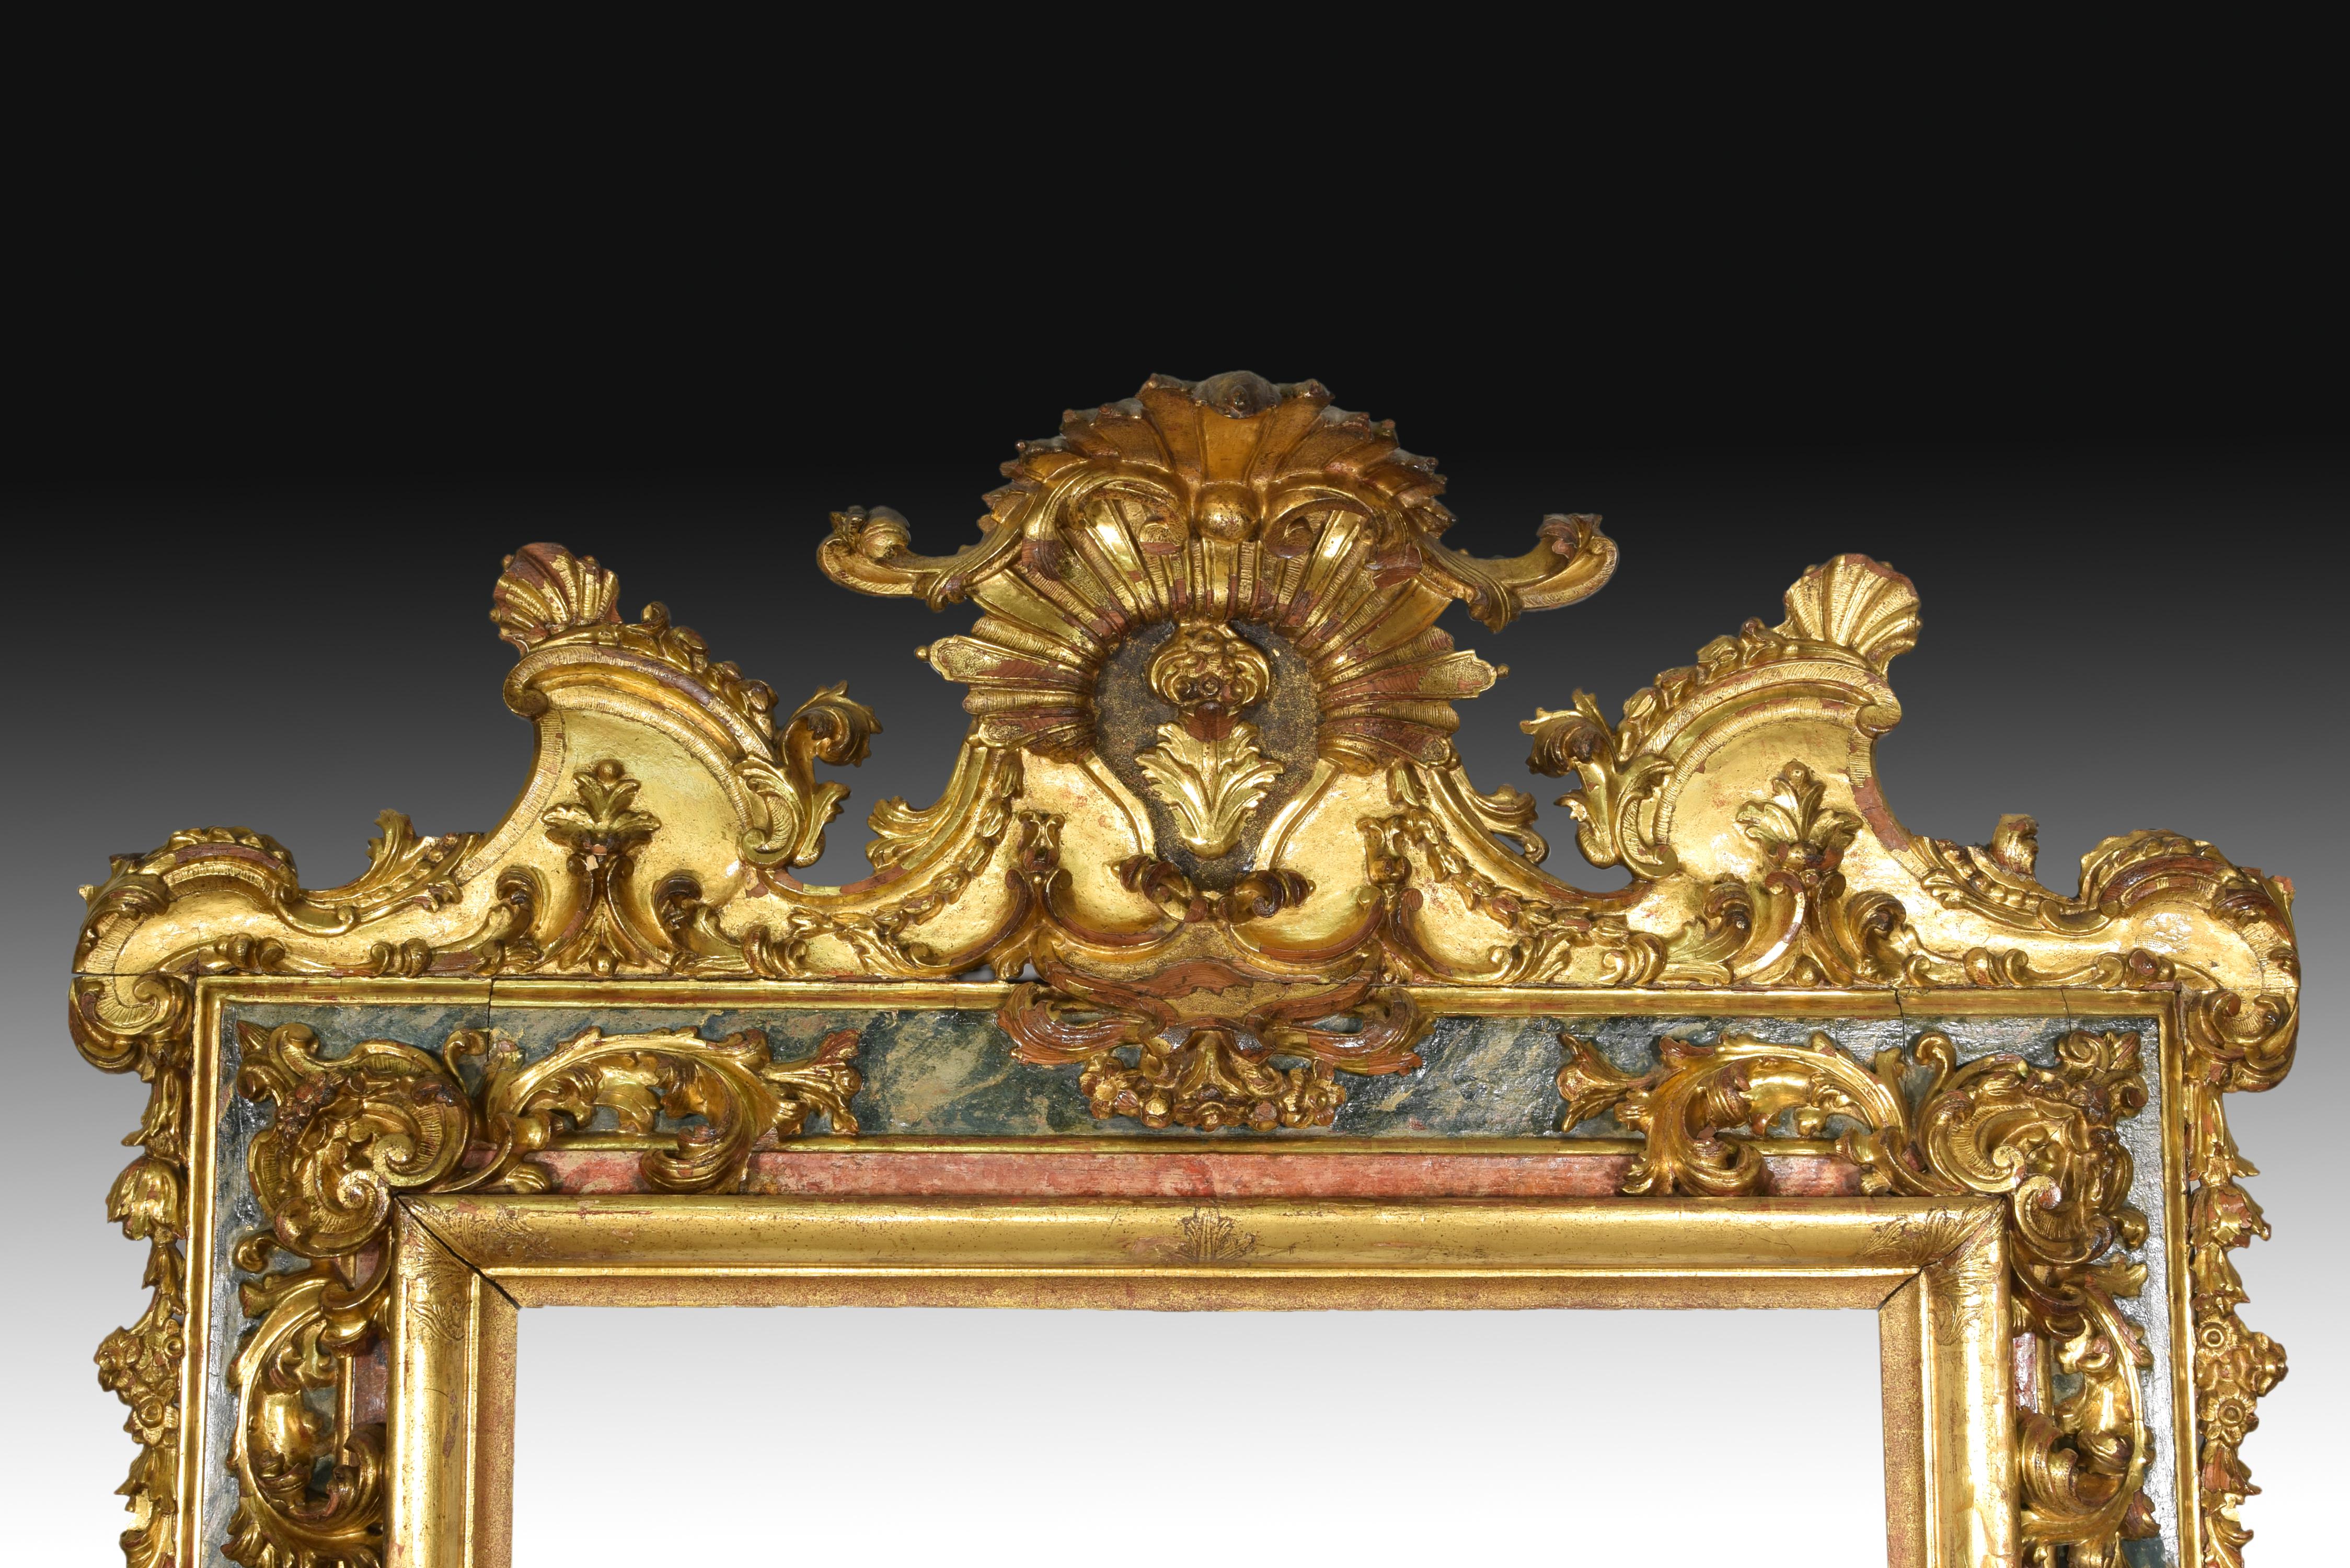 Framework. Carved wood, late 17th-early 18th century.
Rectangular frame that presents a 